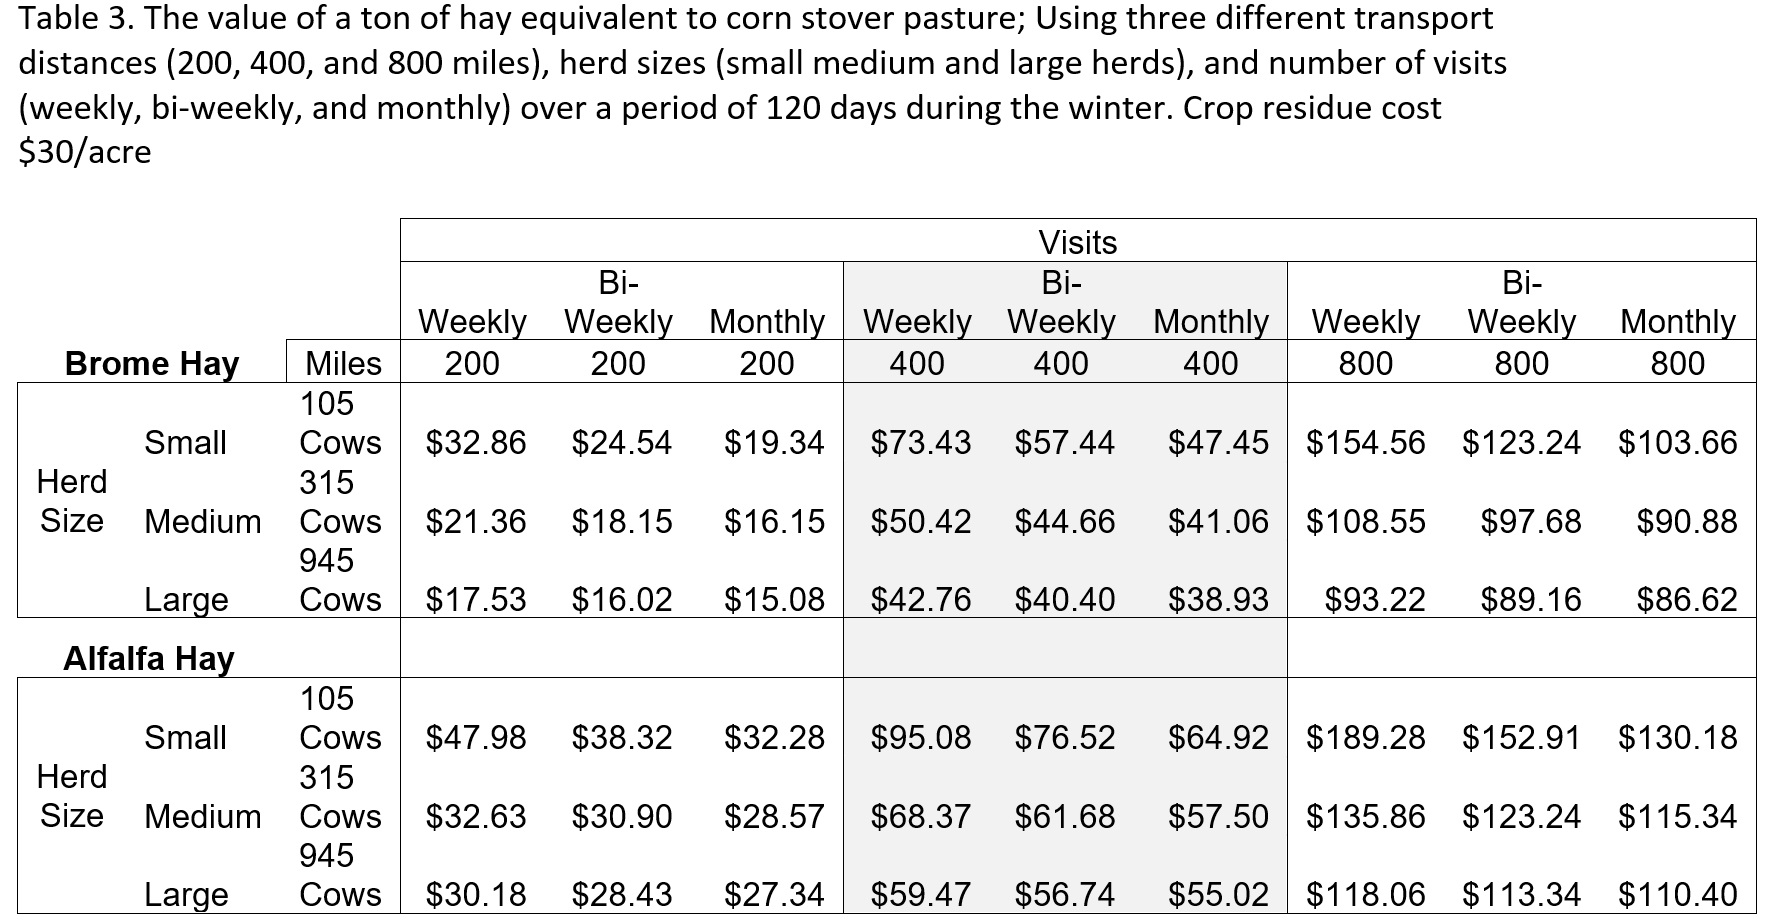 The value of a ton of hay equivalent to corn stover pasture